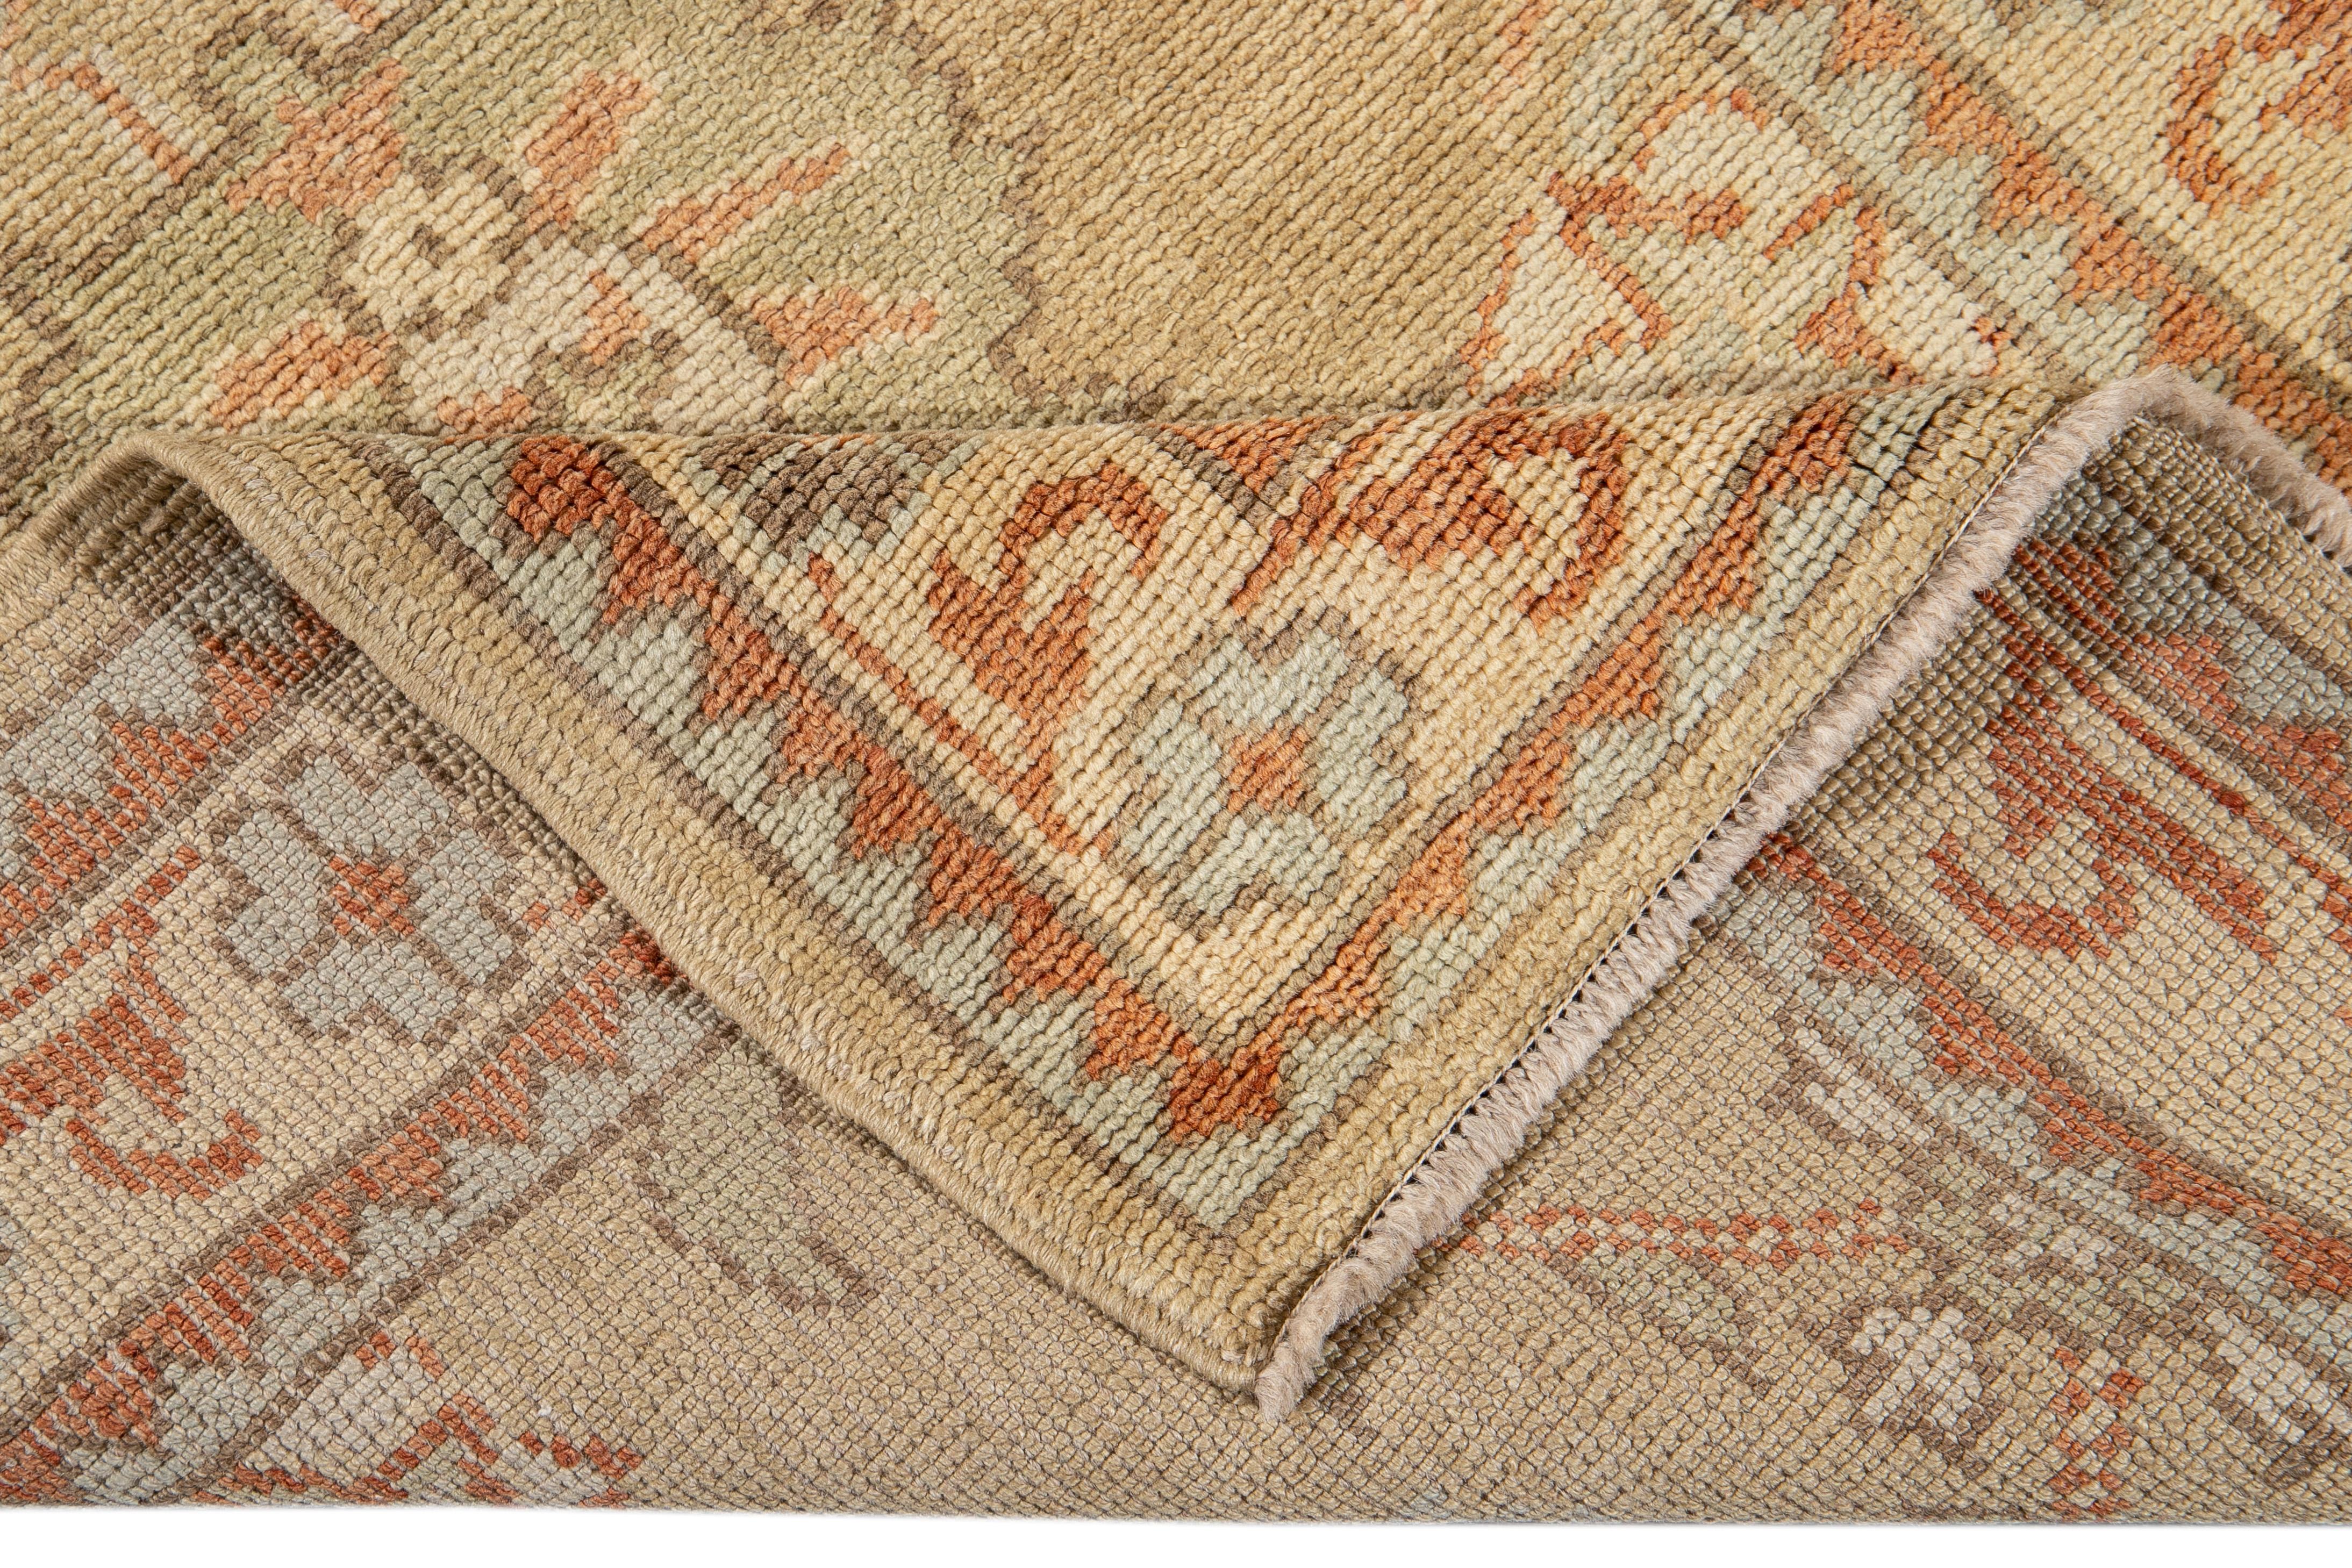 Beautiful modern Turkish Oushak hand-knotted wool runner with a tan field. This Oushak runner has a beige frame and accents of blue and orange in a gorgeous all-over geometric floral design.

This runner measures: 3' 3